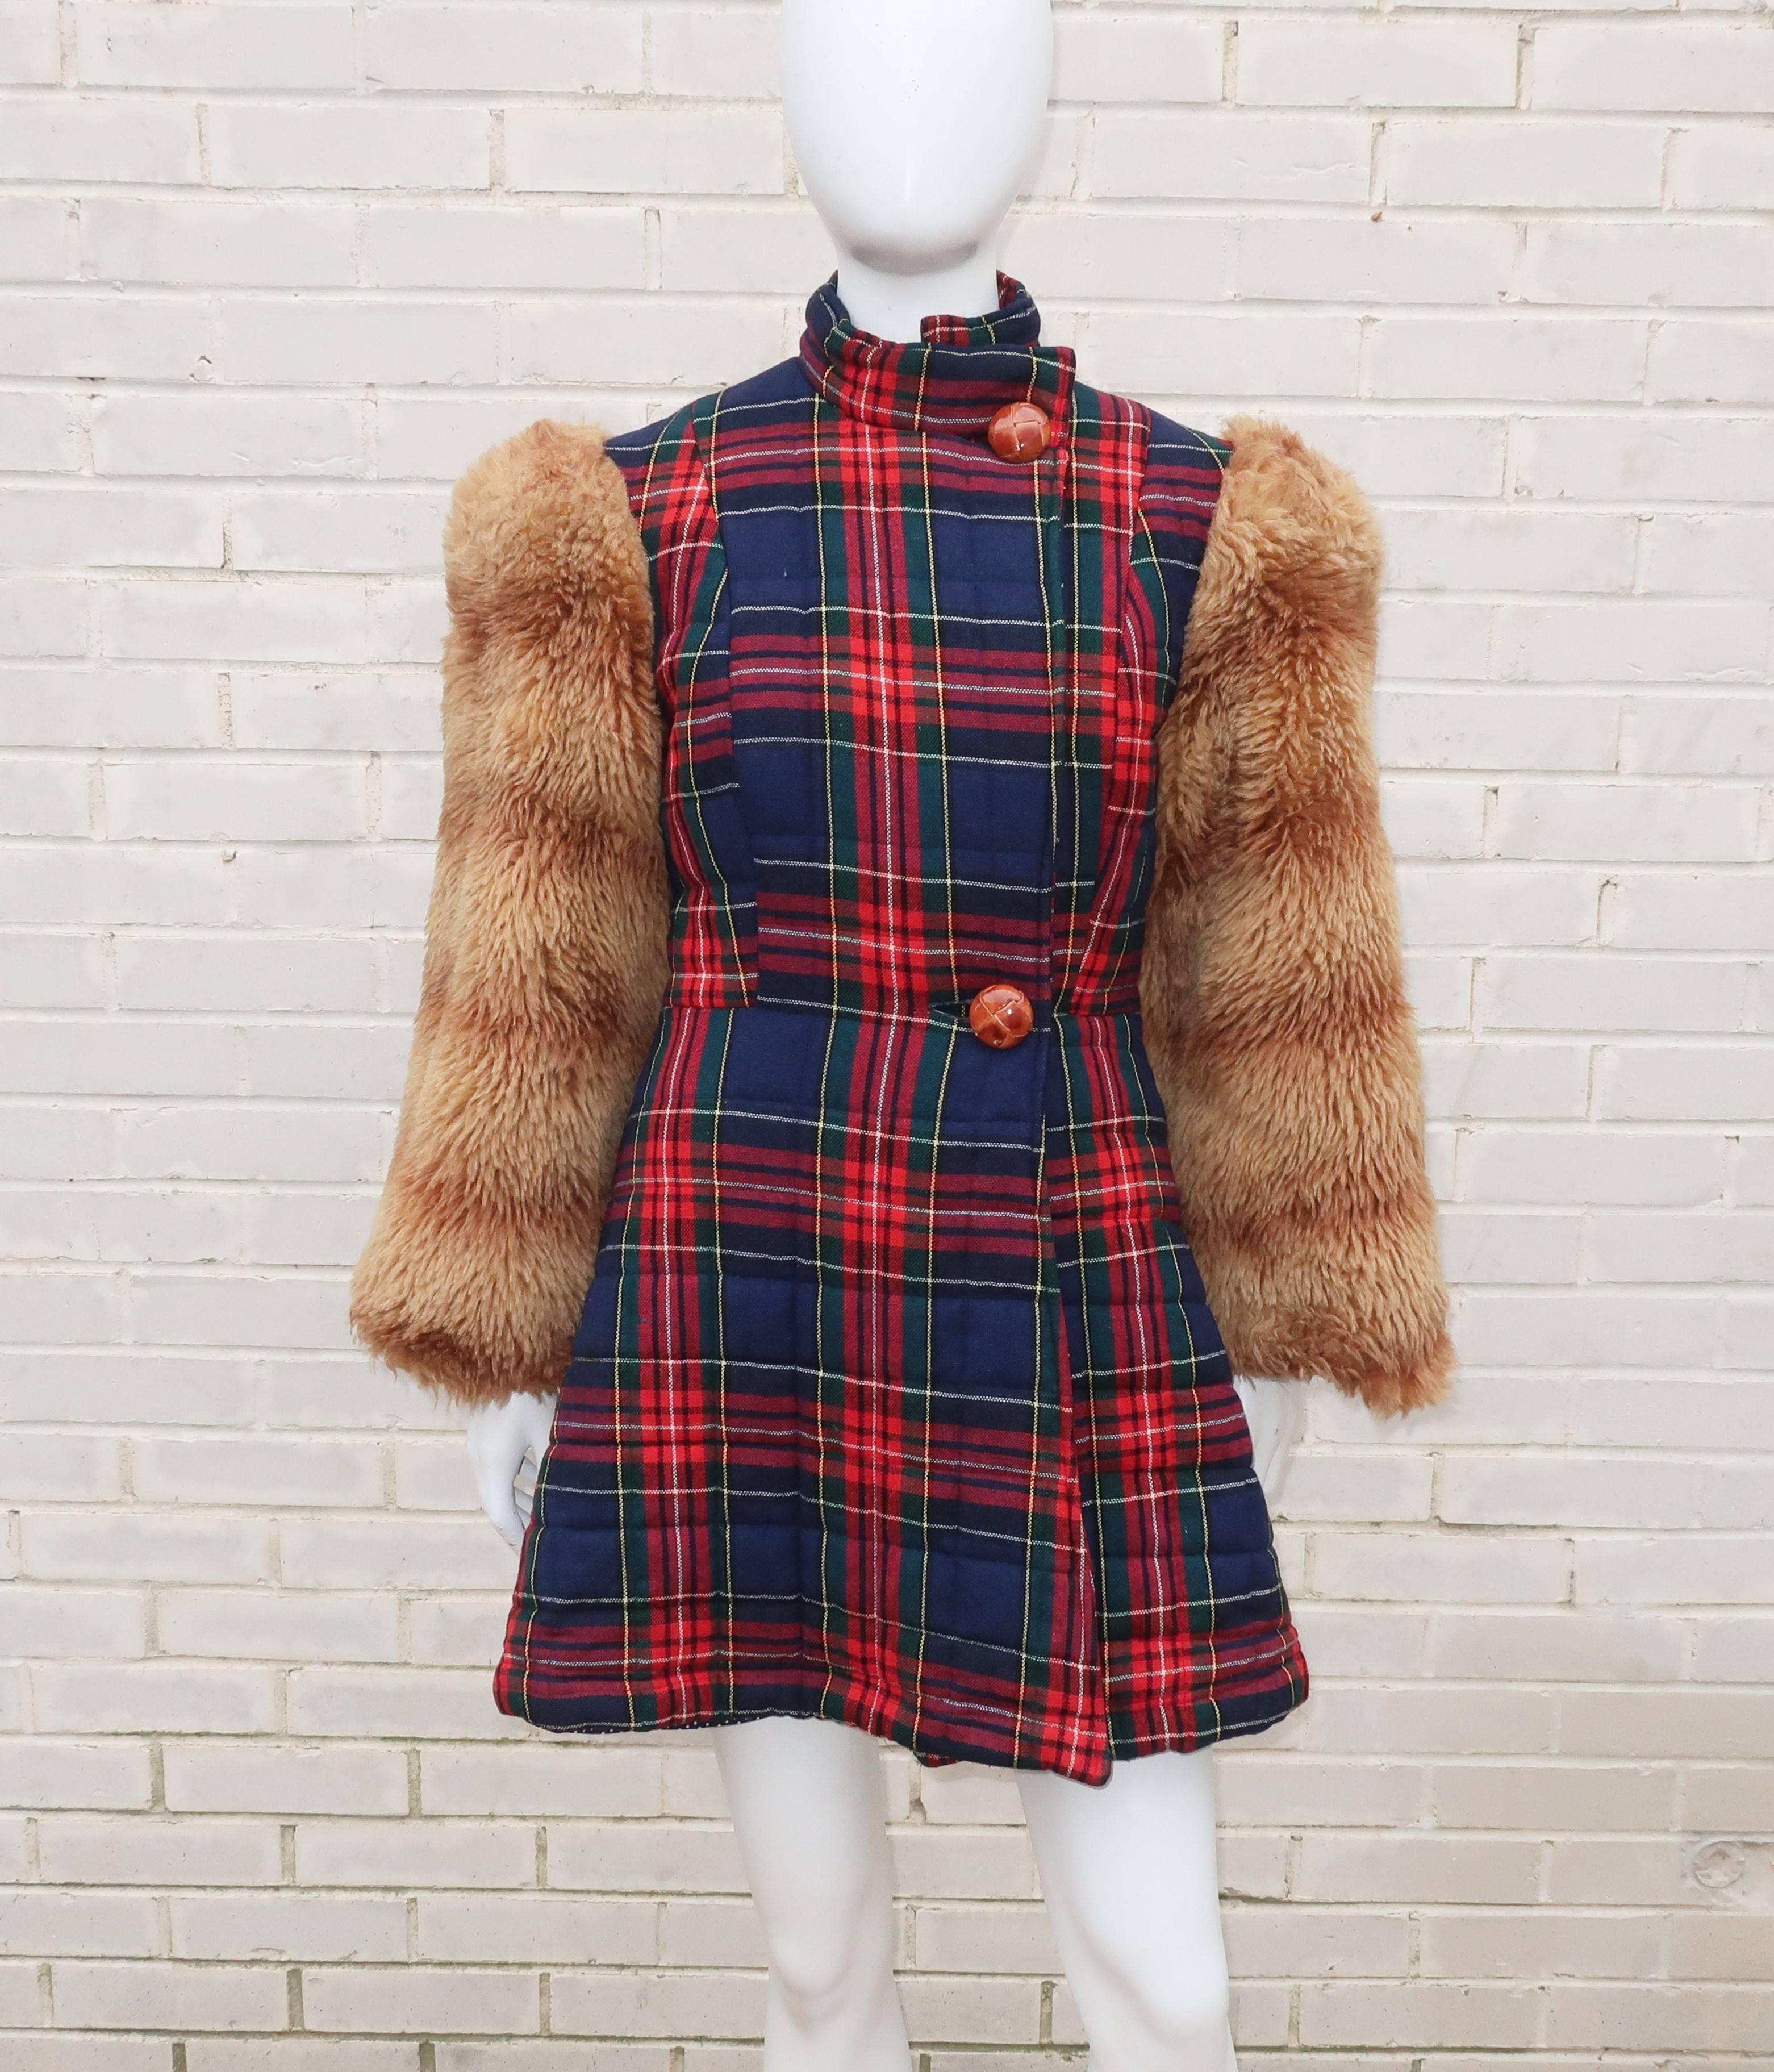 Wild & Wonderful!  Betsey Johnson hit the fashion world in the 1960's and quickly became an instrumental part of the 'Youthquake' scene designing fun and flirty clothing with an eye for the hip street fashions of the day.  This early 1970's coat